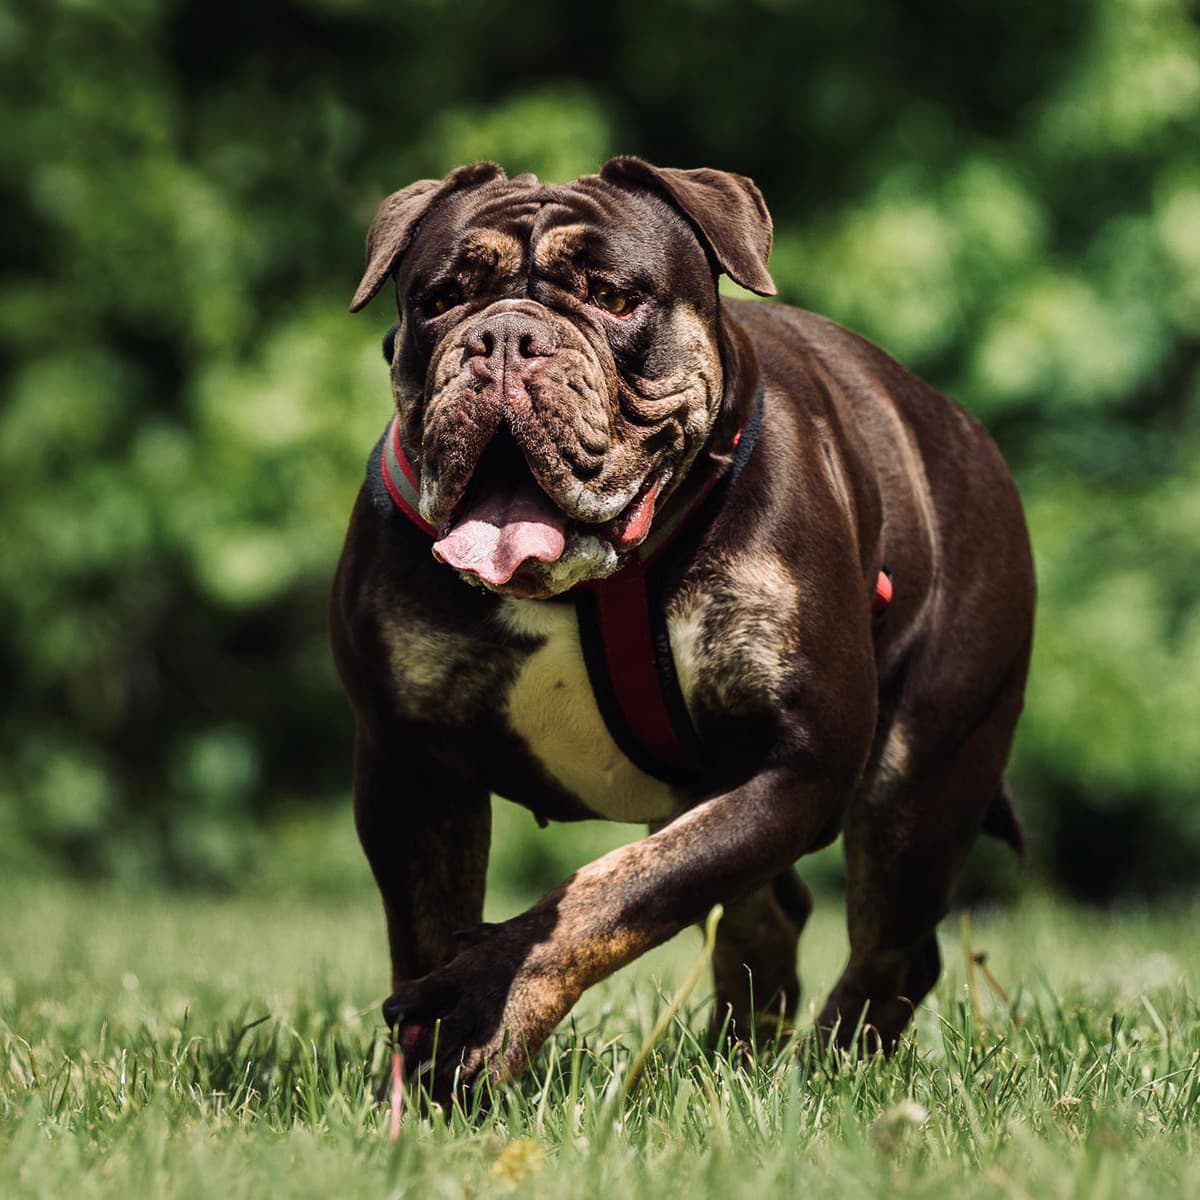 Olde English Bulldogge Trotting in Greenery With Harness On | Taste of the Wild